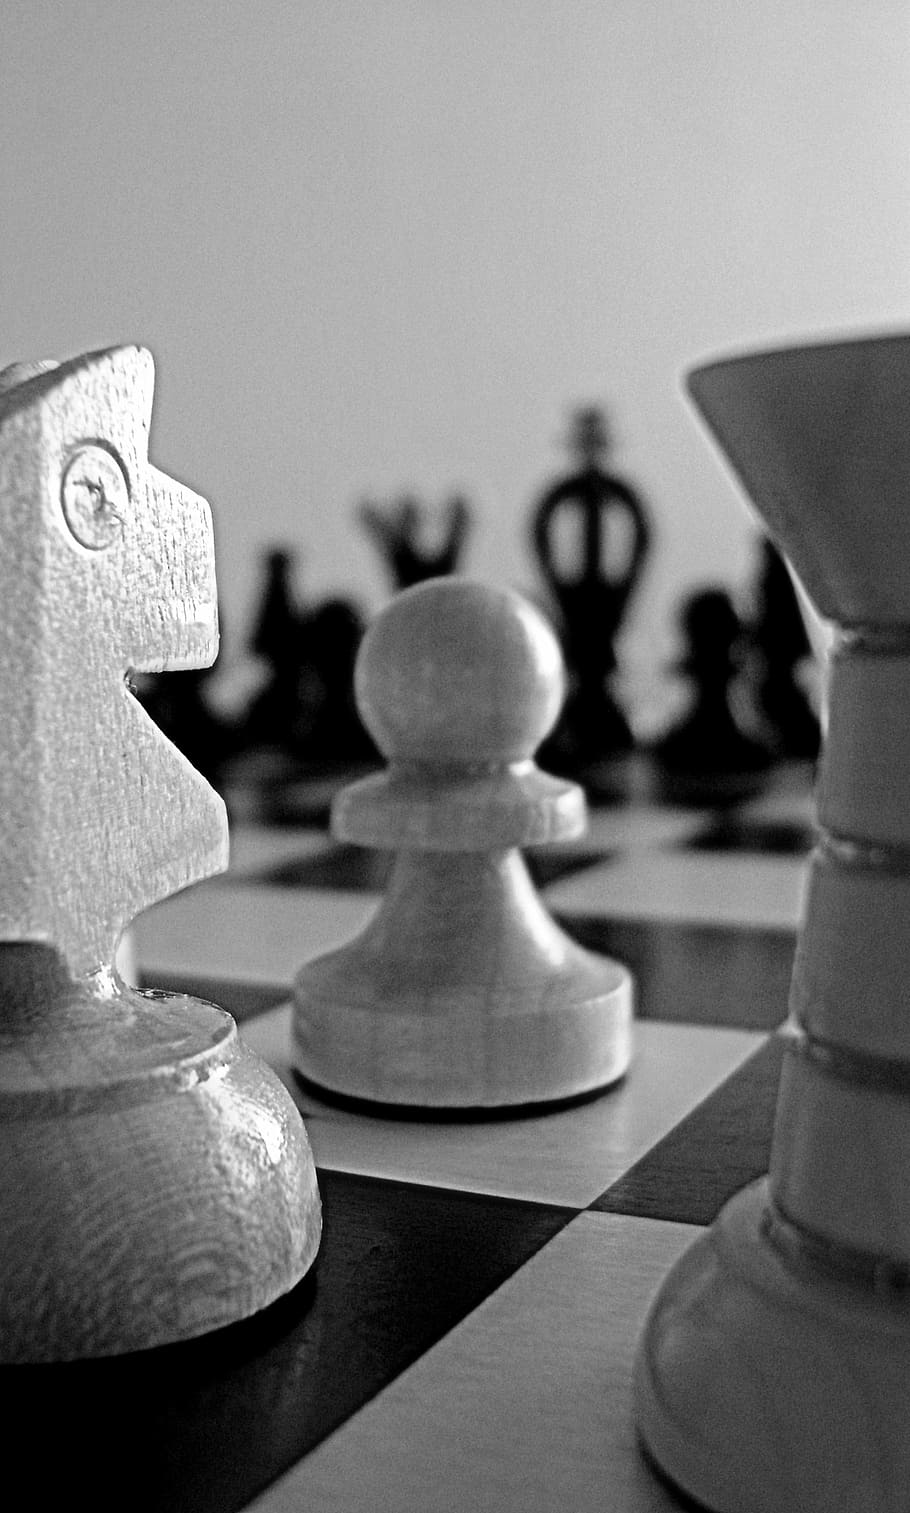 chess, game, strategic, play, intelligence, hobby, leisure games, board game, chess piece, indoors